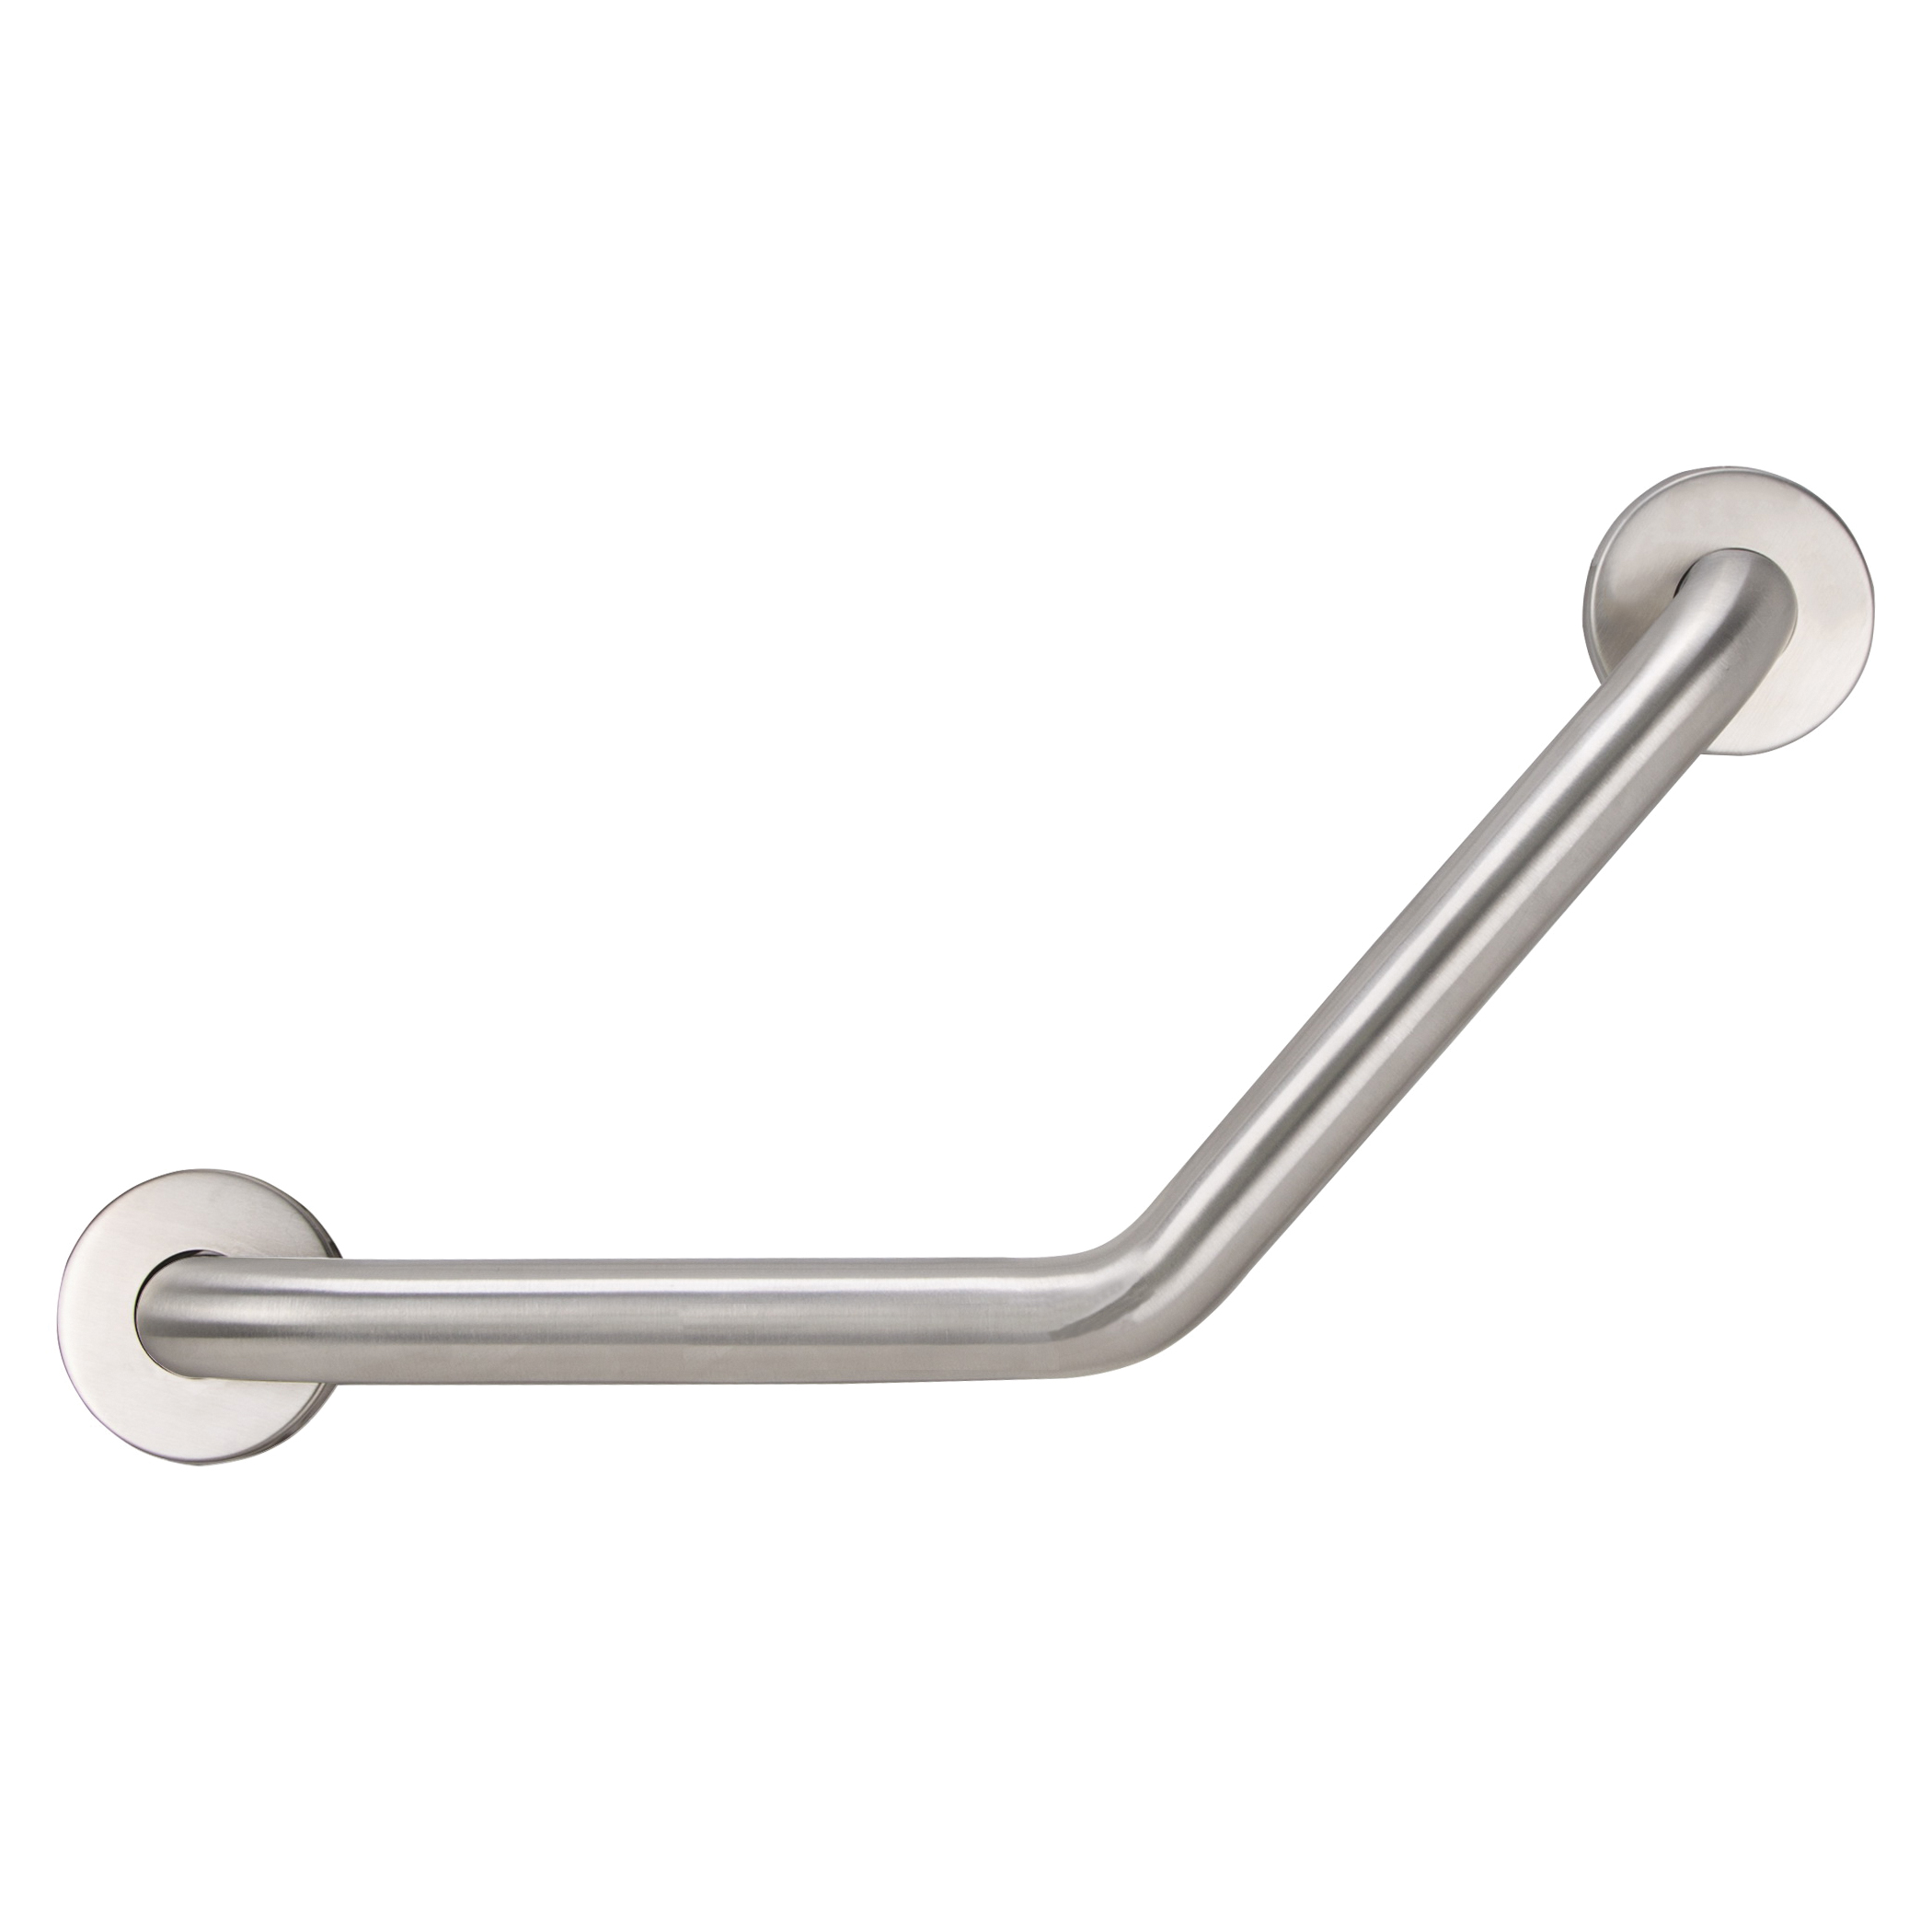 YG01-01-1.5 Grab Bar, 16 in L Bar, Stainless Steel, Wall Mounted Mounting